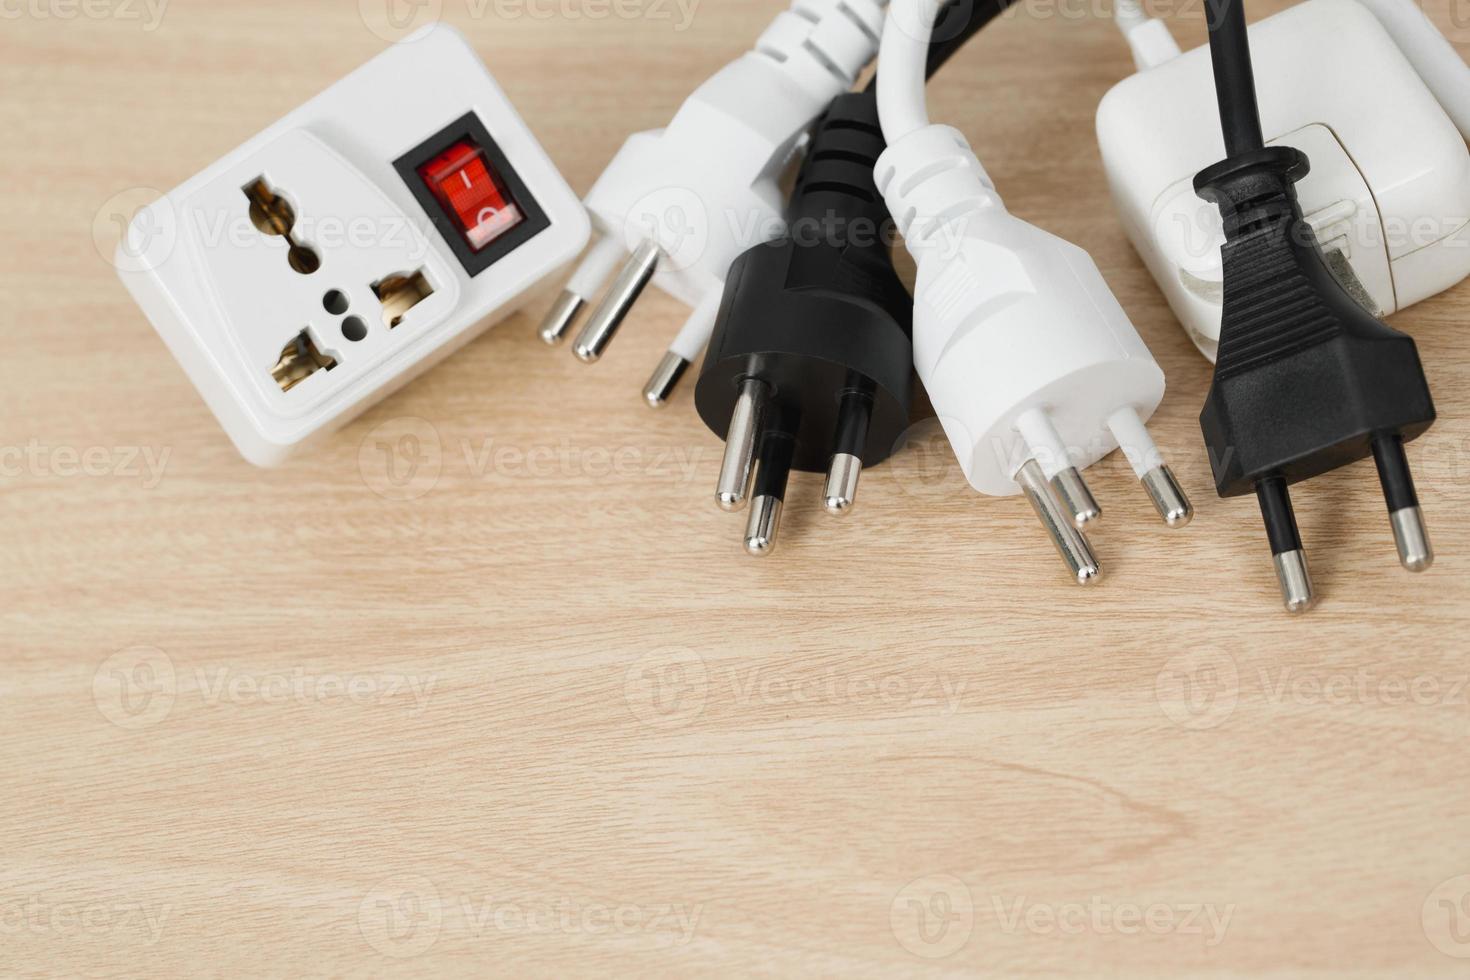 Electrical appliances plugs full of all plugs or plugs together. Because of the risk of causing a short circuit from high heat accumulated in the wires. photo